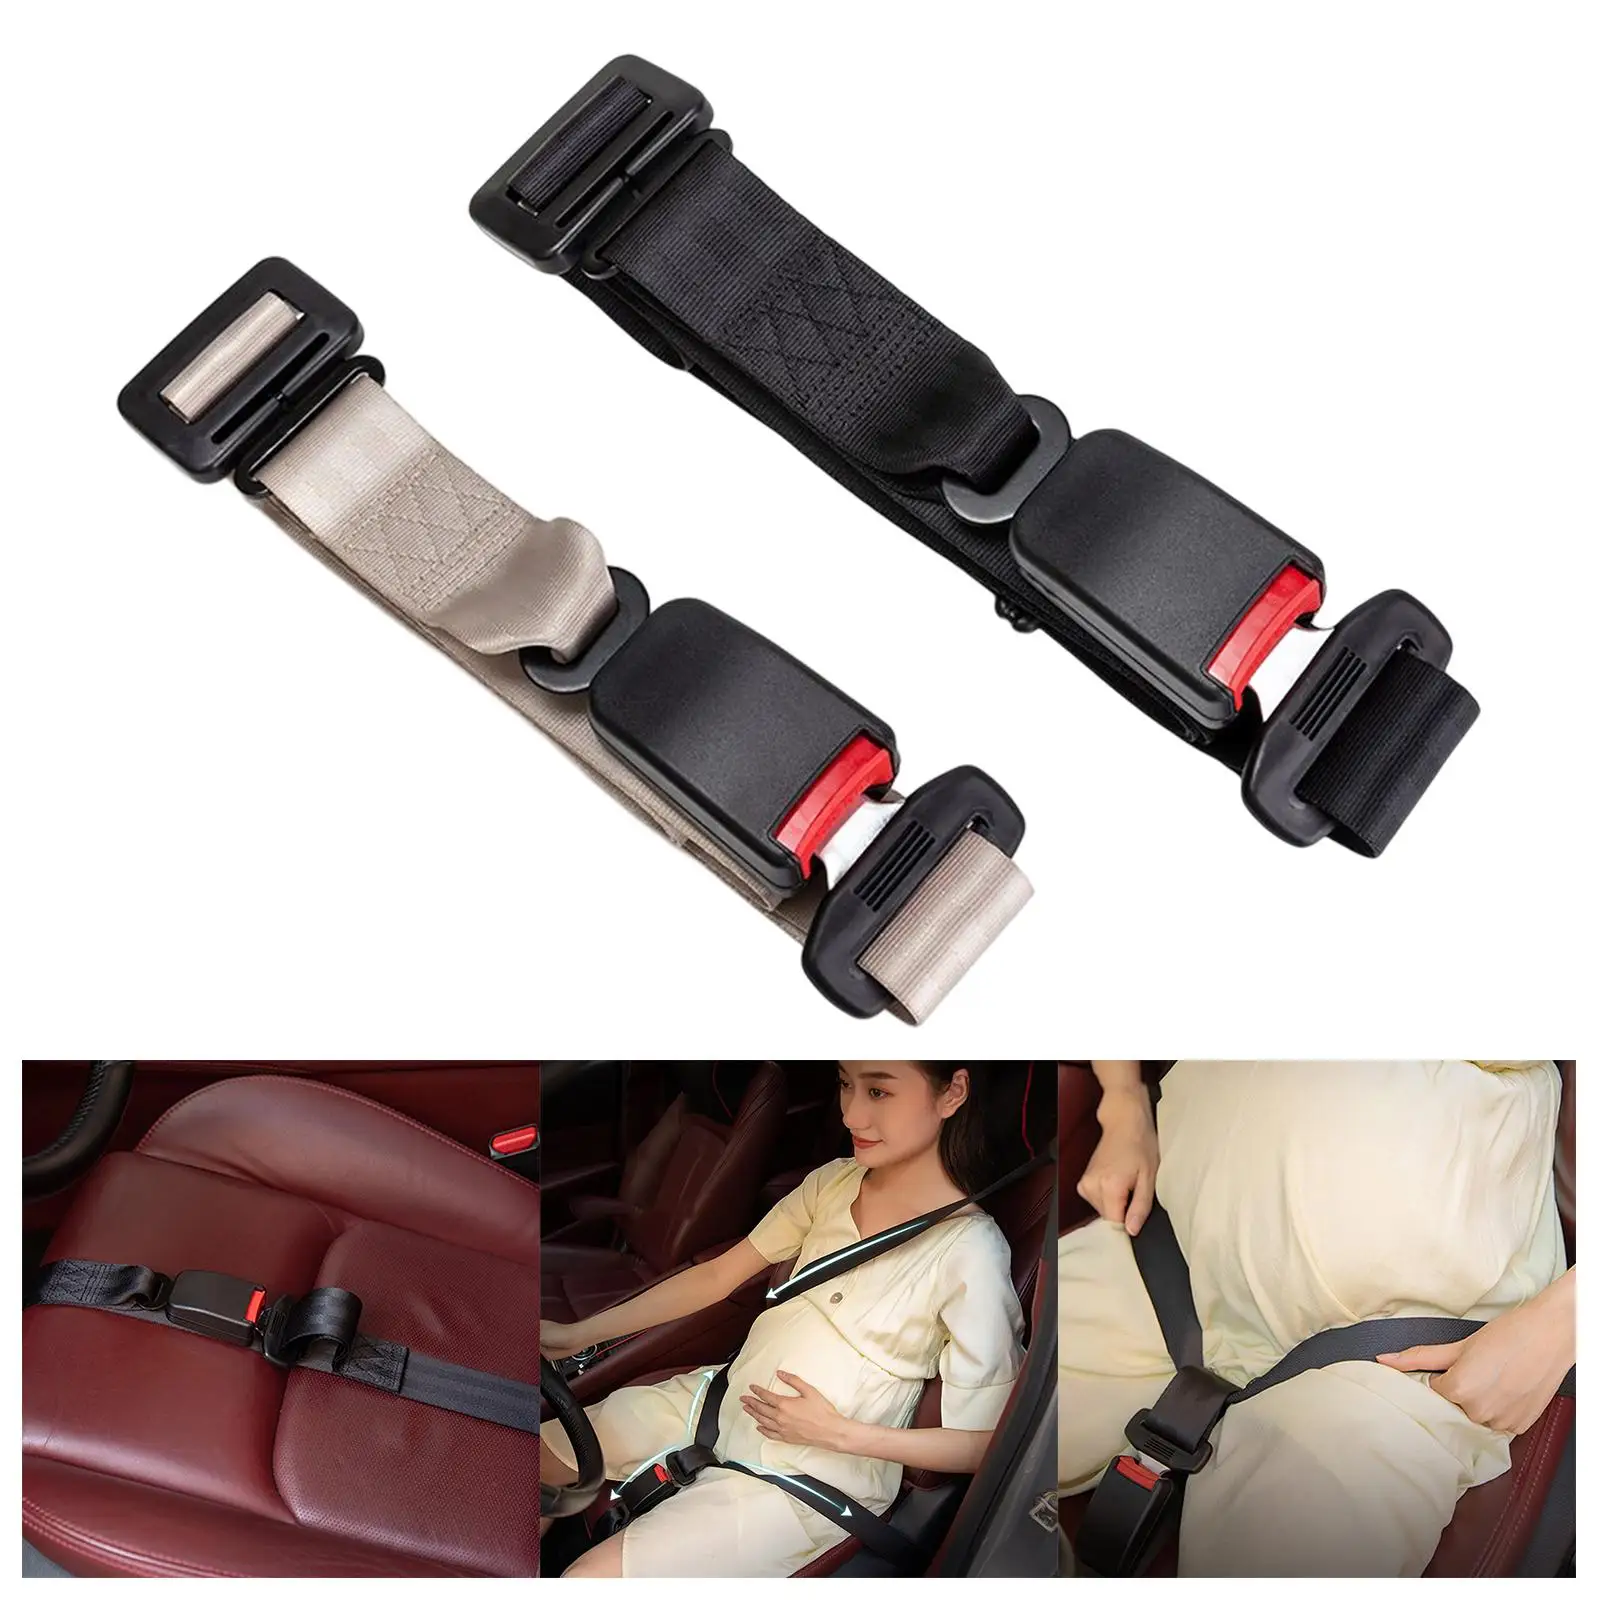 Pregnancy Seat Safety Belt Prevent Compression of Abdomen Protector Buffer Adjuster for Pregnancy Woman